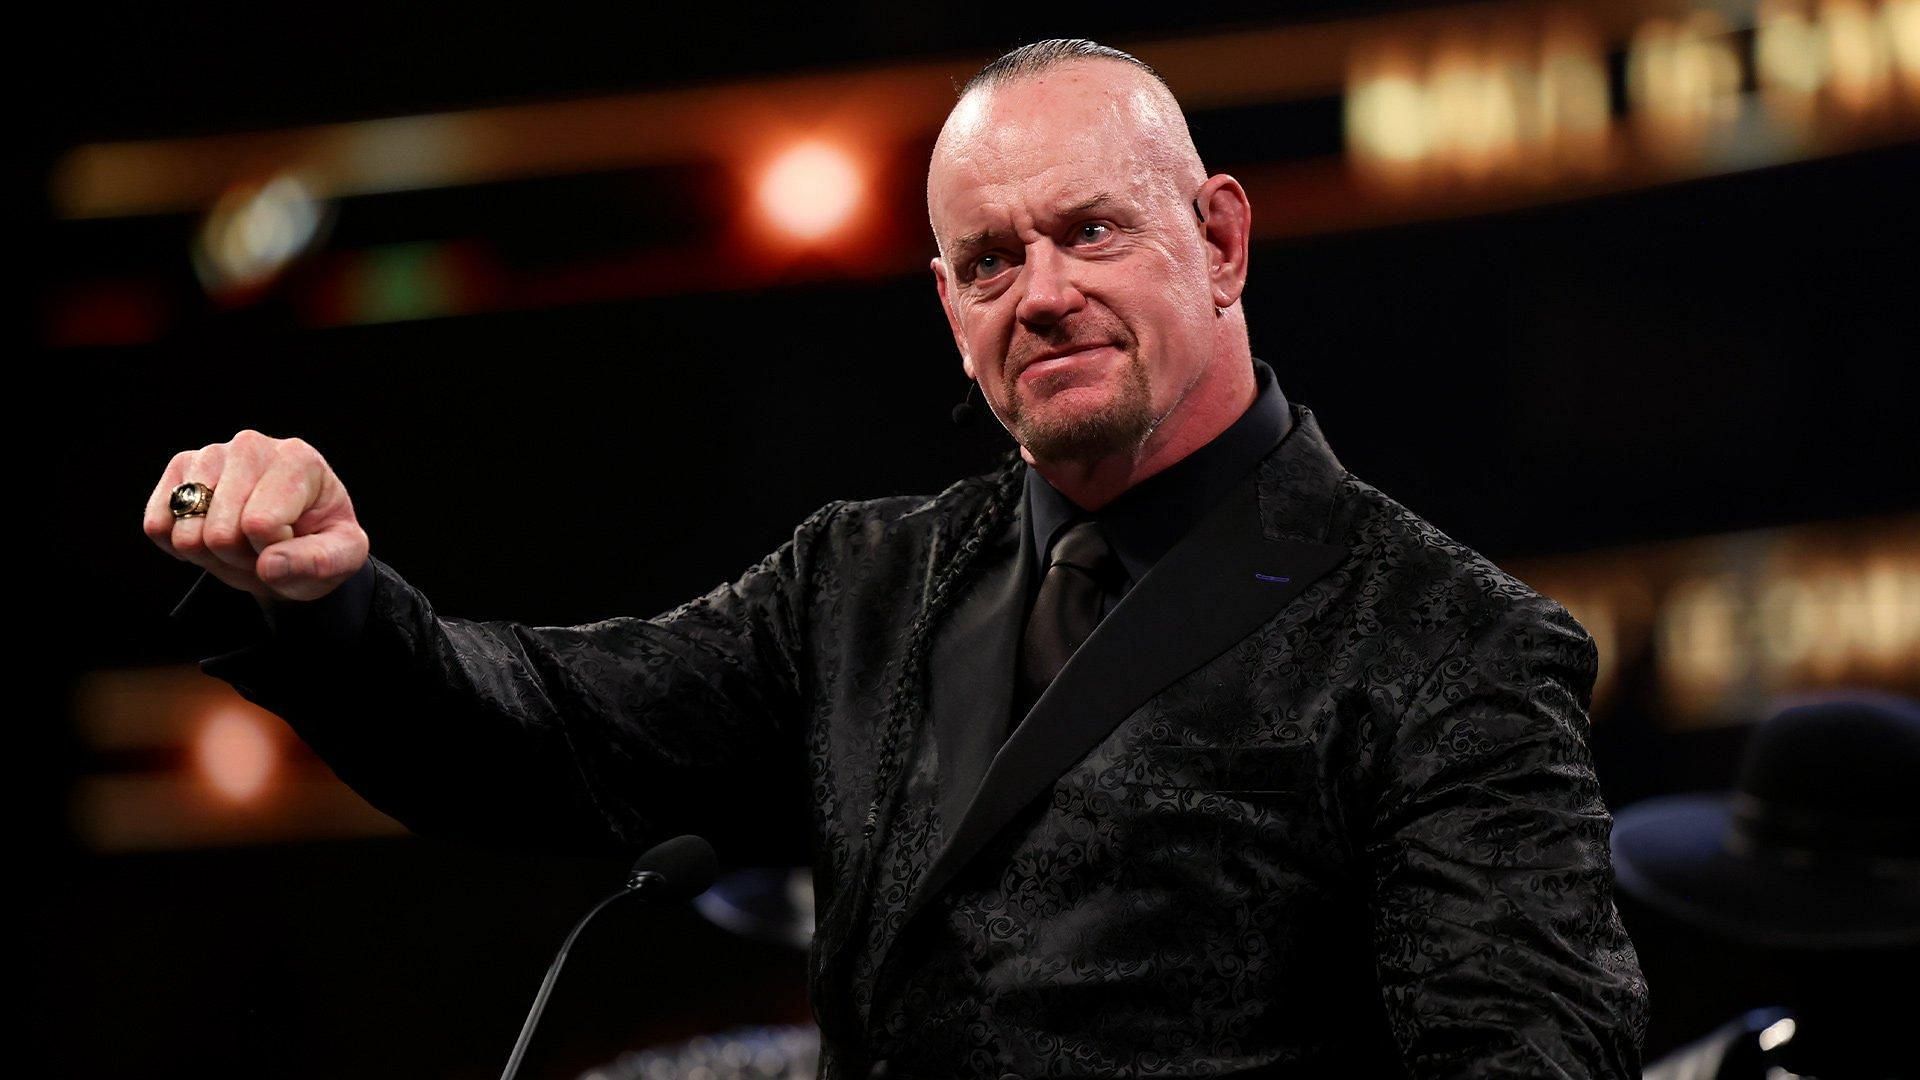 The Undertaker during the Hall of Fame ceremony